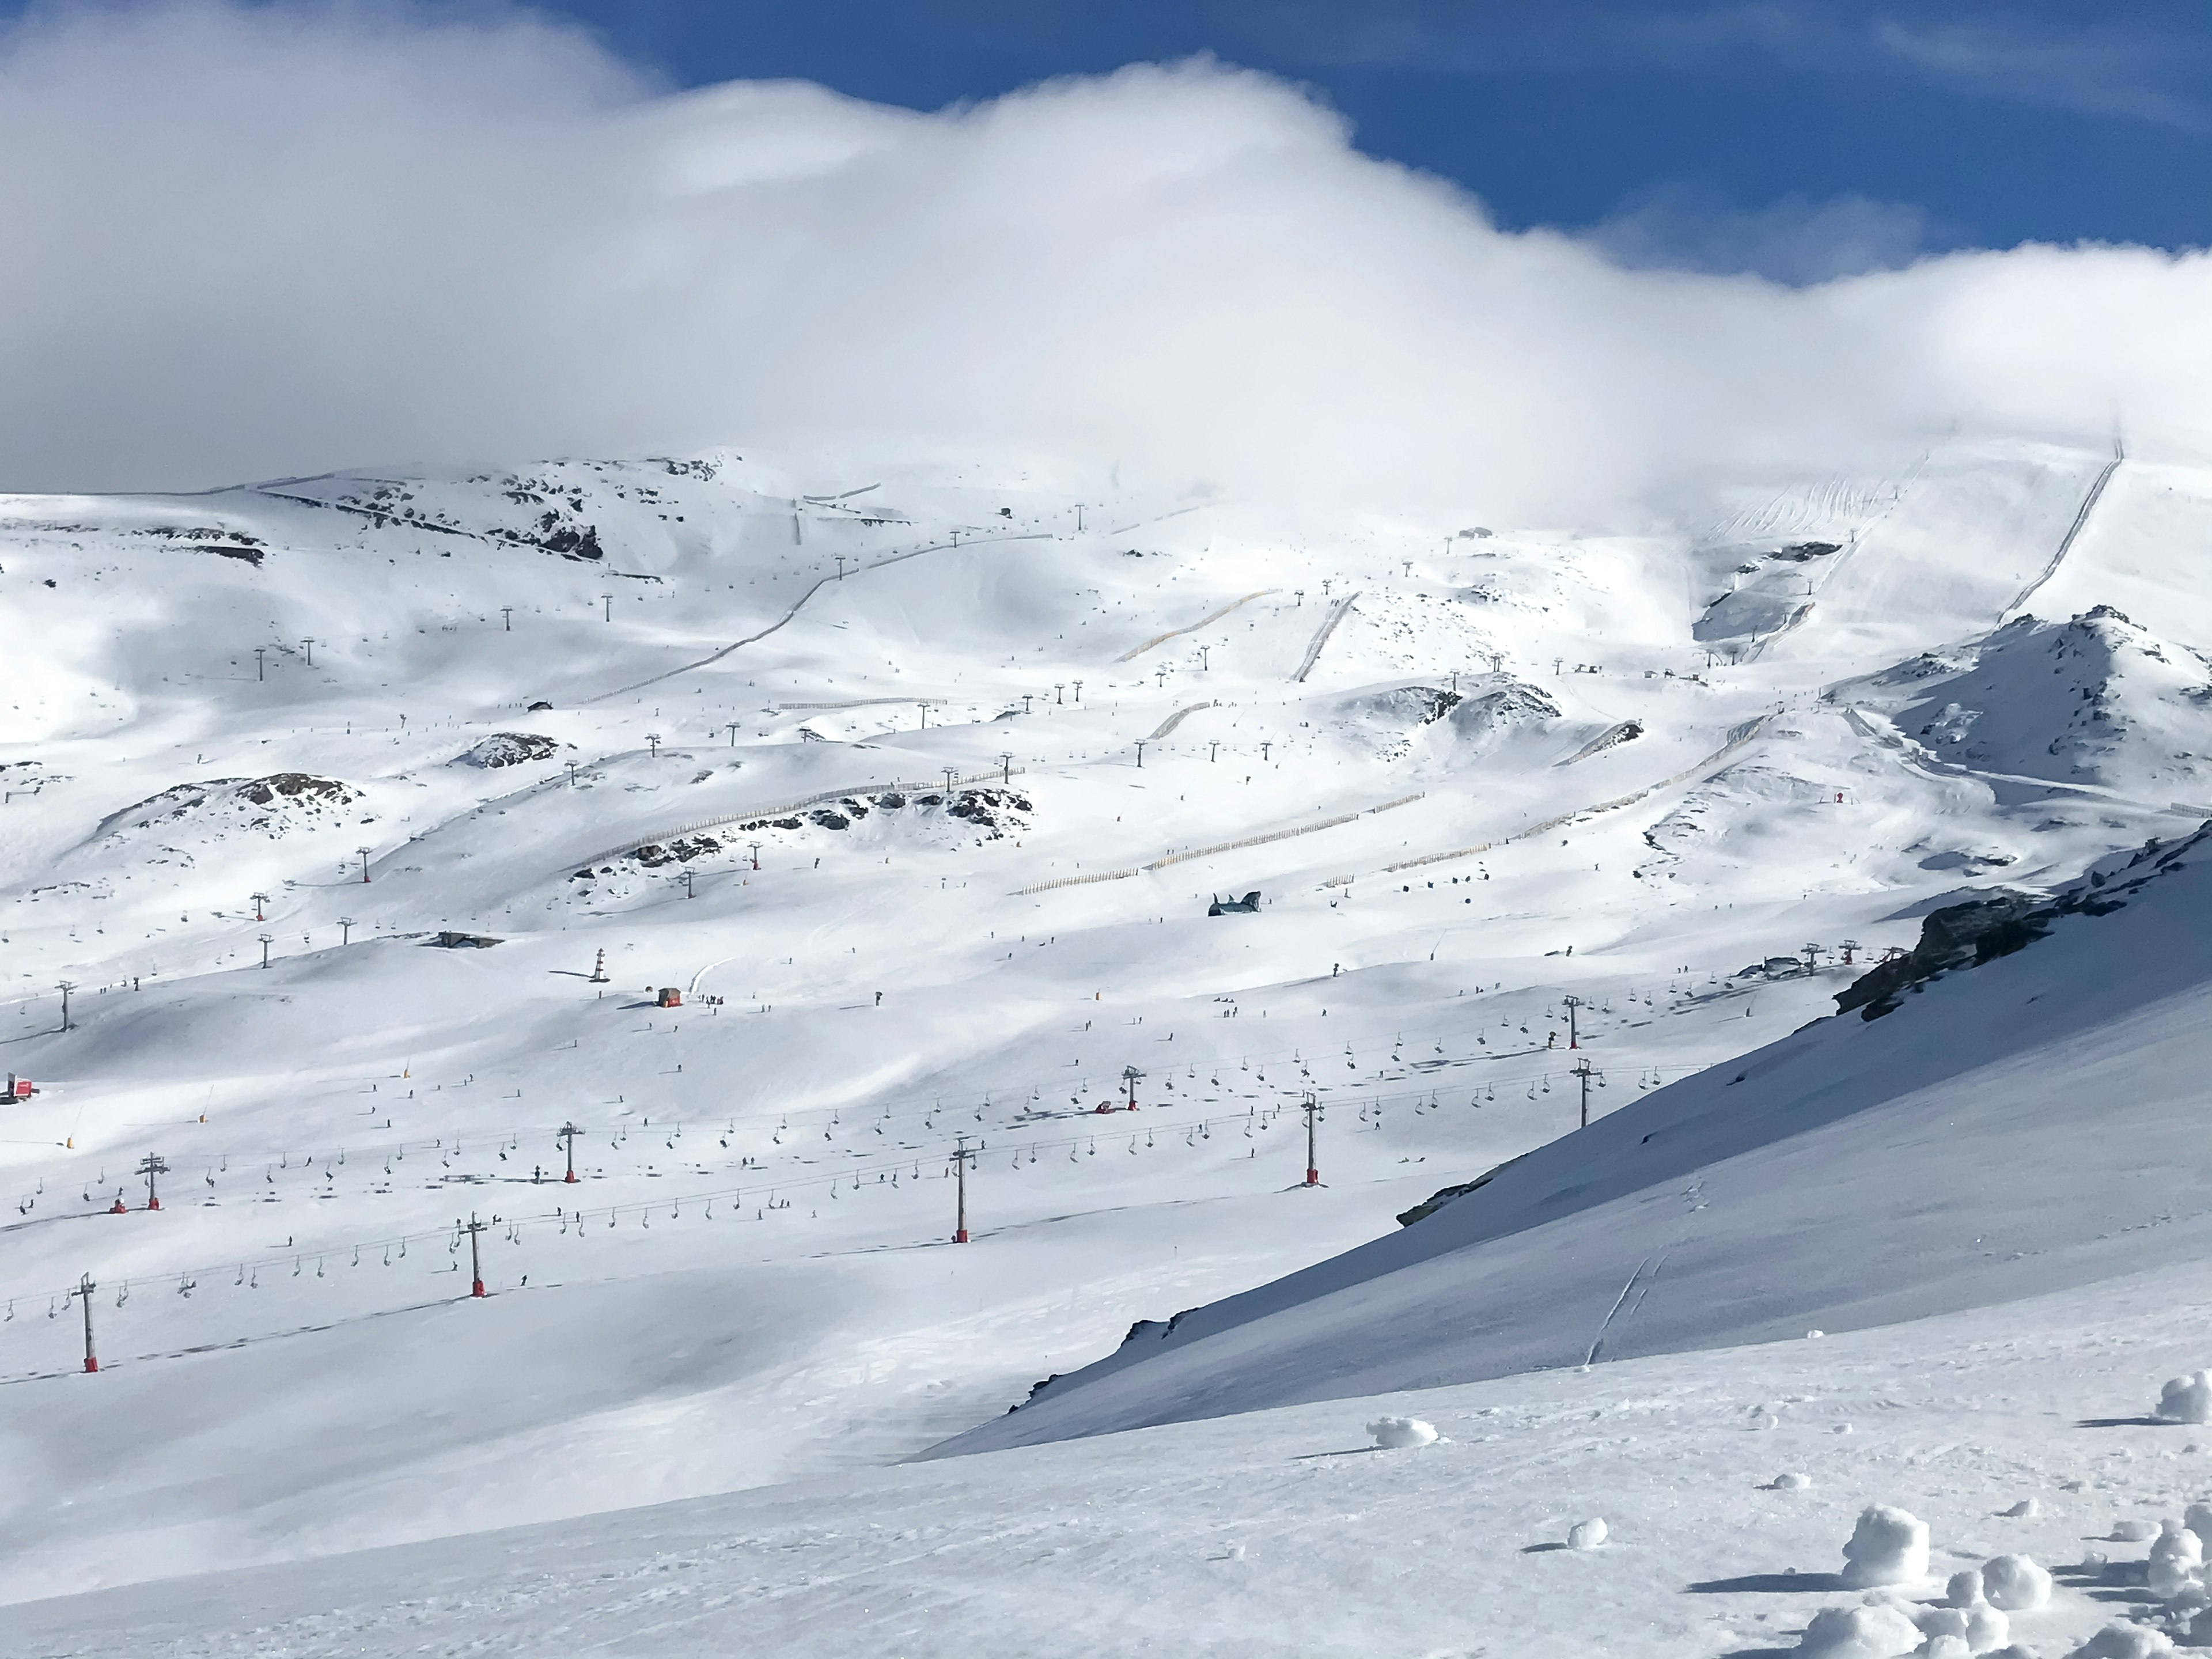 Skiing doesn't get any better than at Parque Nacional de Sierra Nevada.